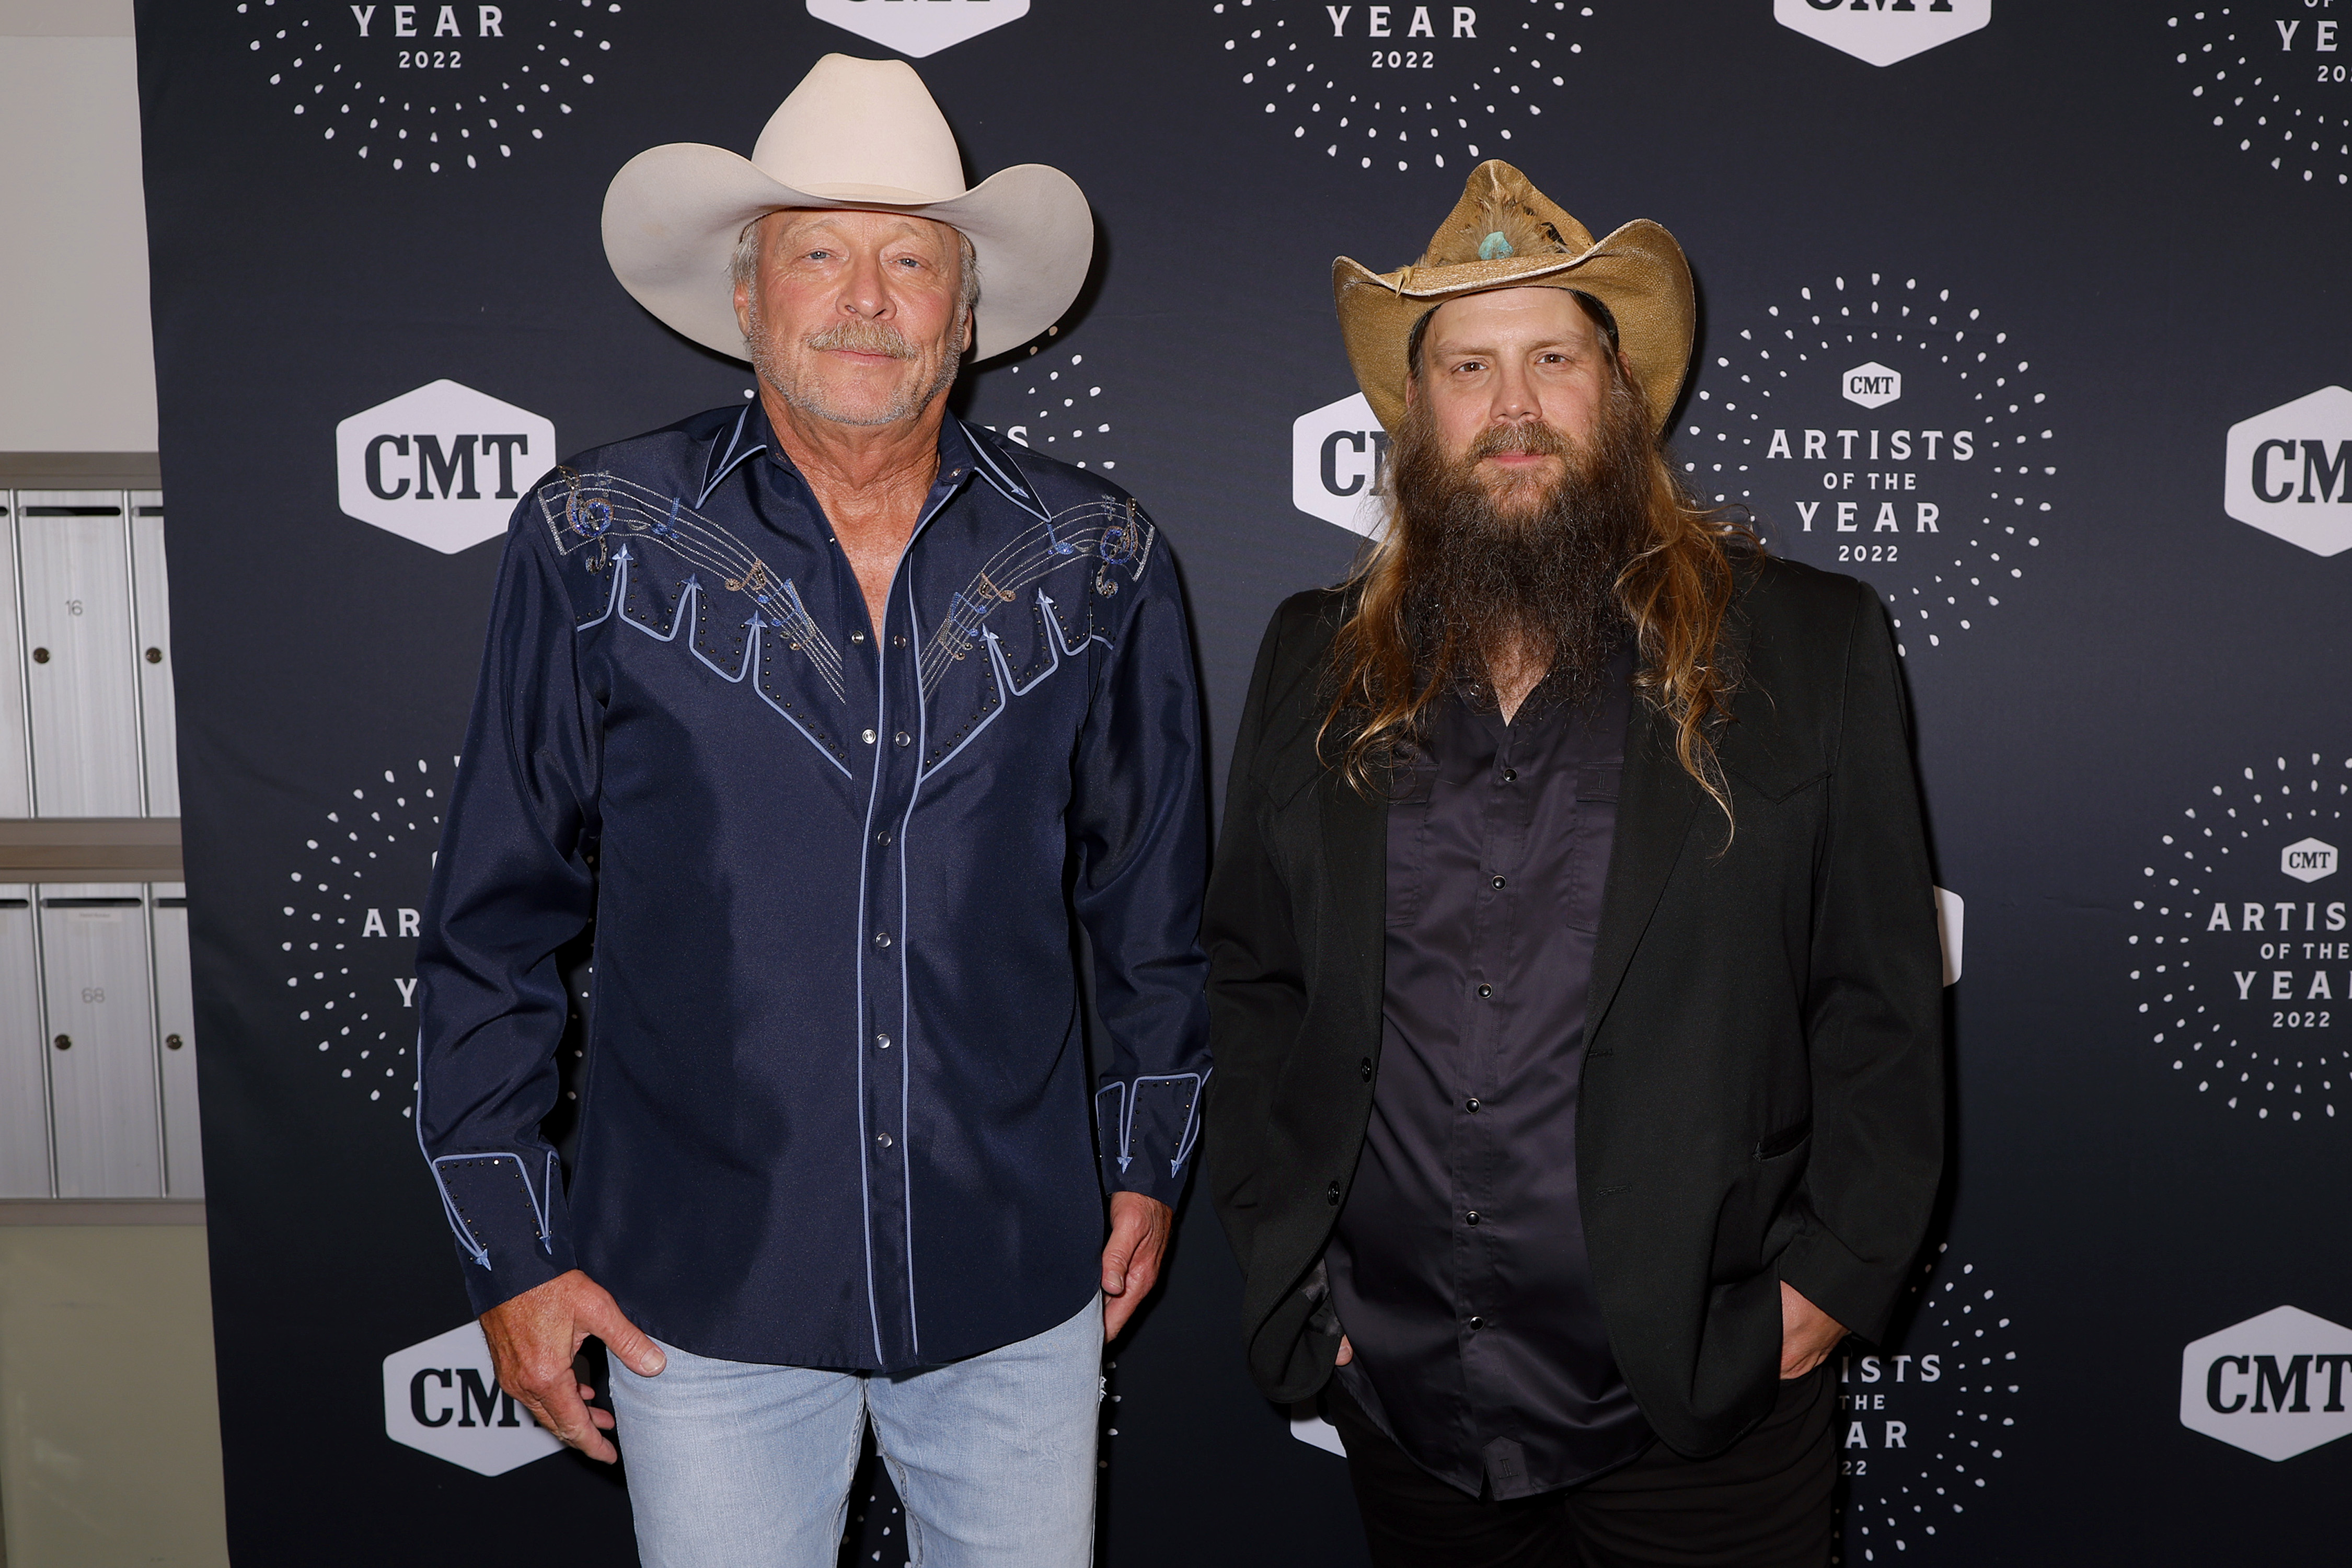 Alan Jackson and Chris Stapleton during the 2022 CMT Artists of the Year on October 12, 2022 in Nashville, Tennessee | Source: Getty Images